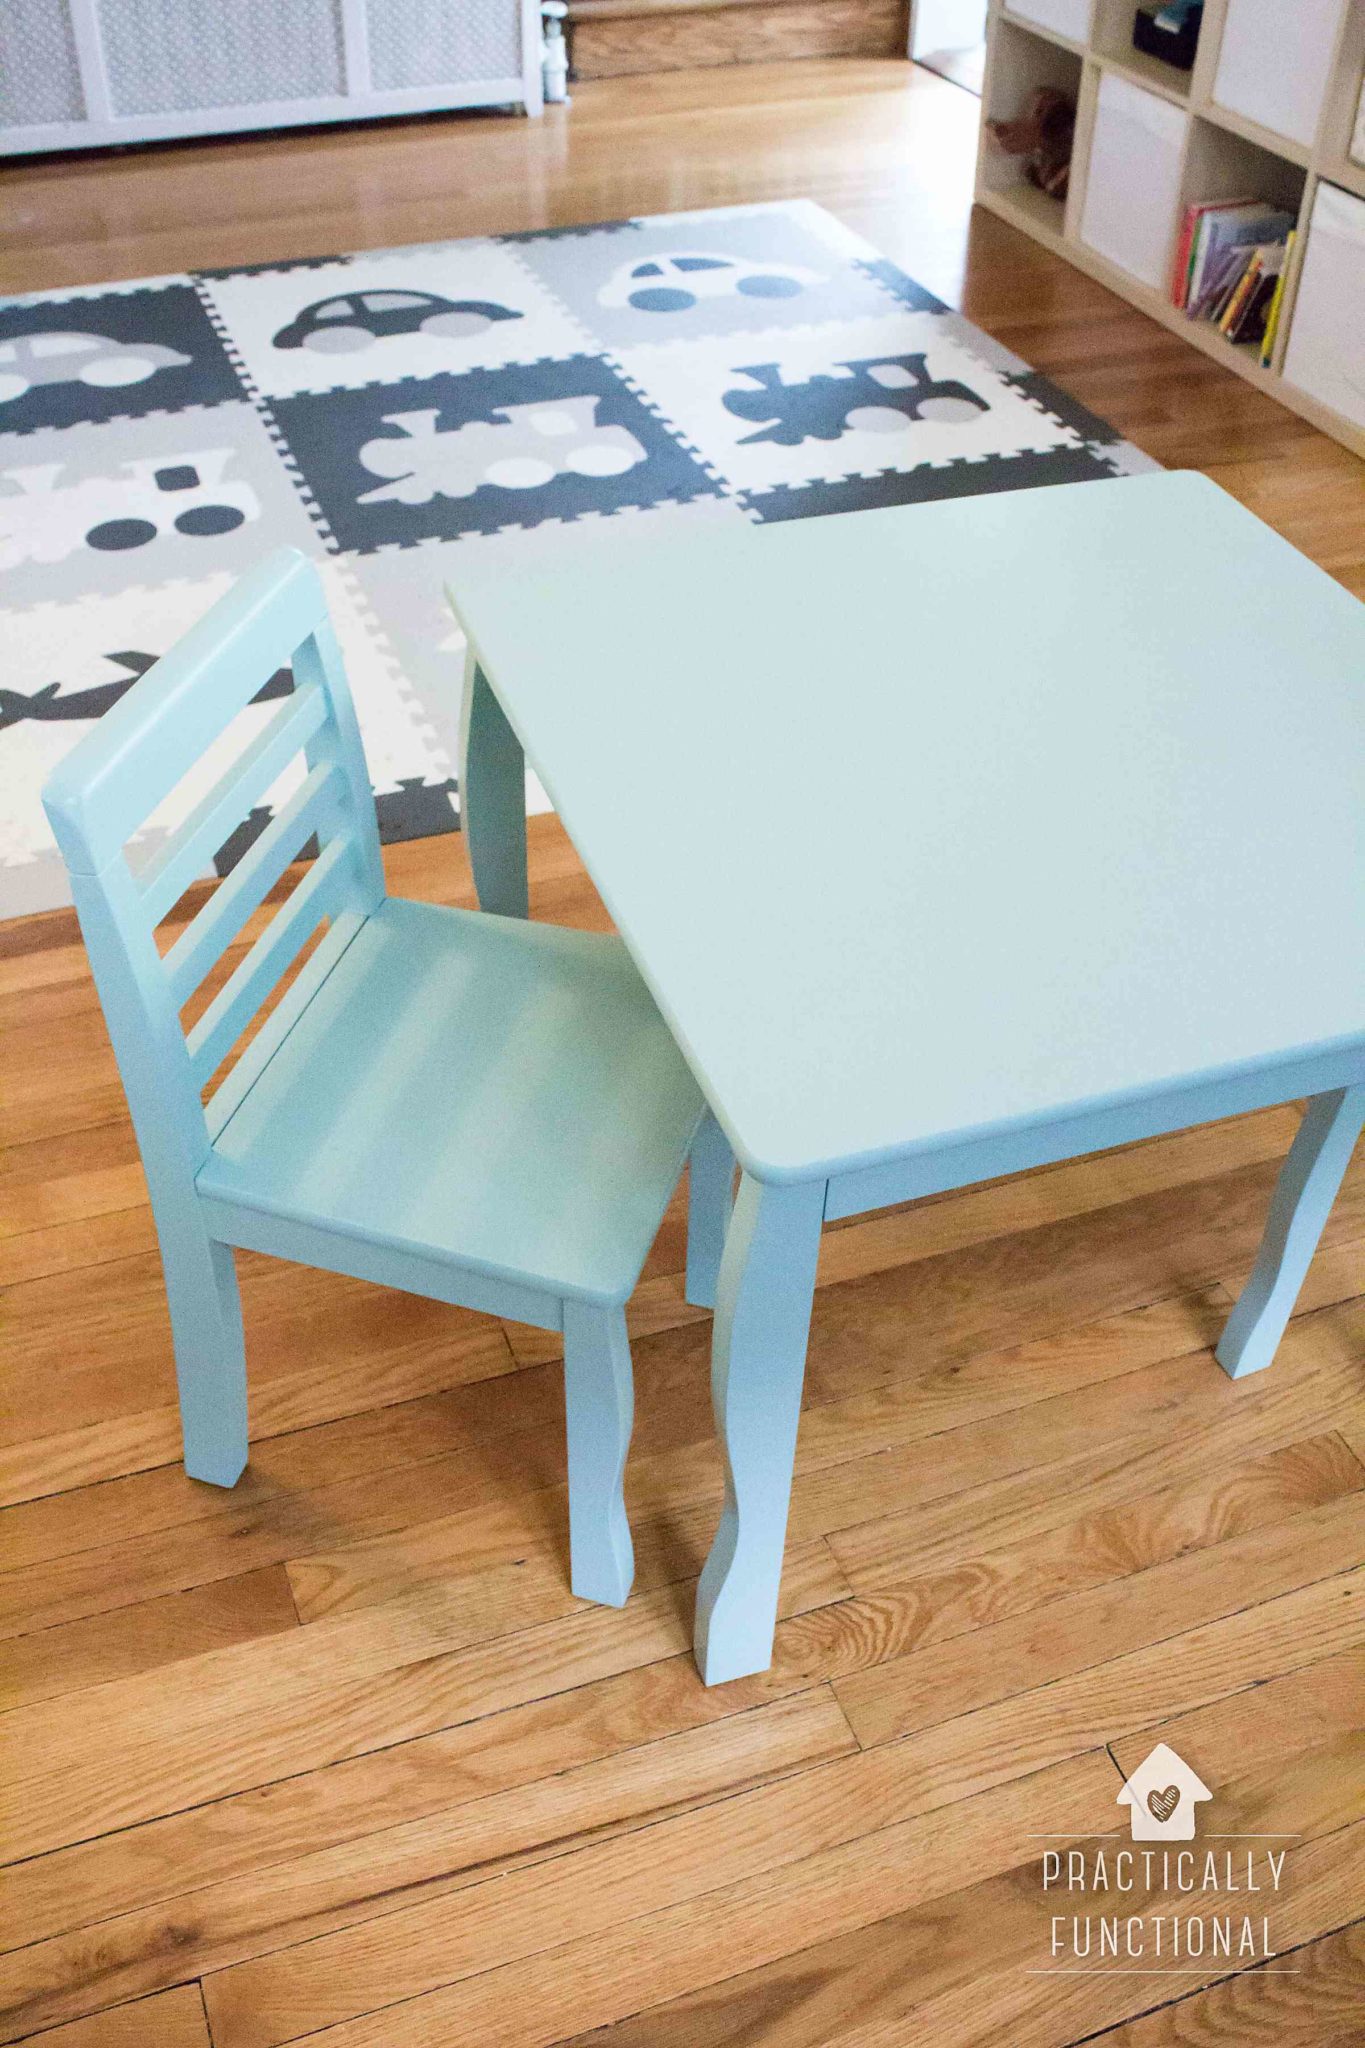 The Easiest Way To Paint Furniture No Sanding Or Priming Practically Functional